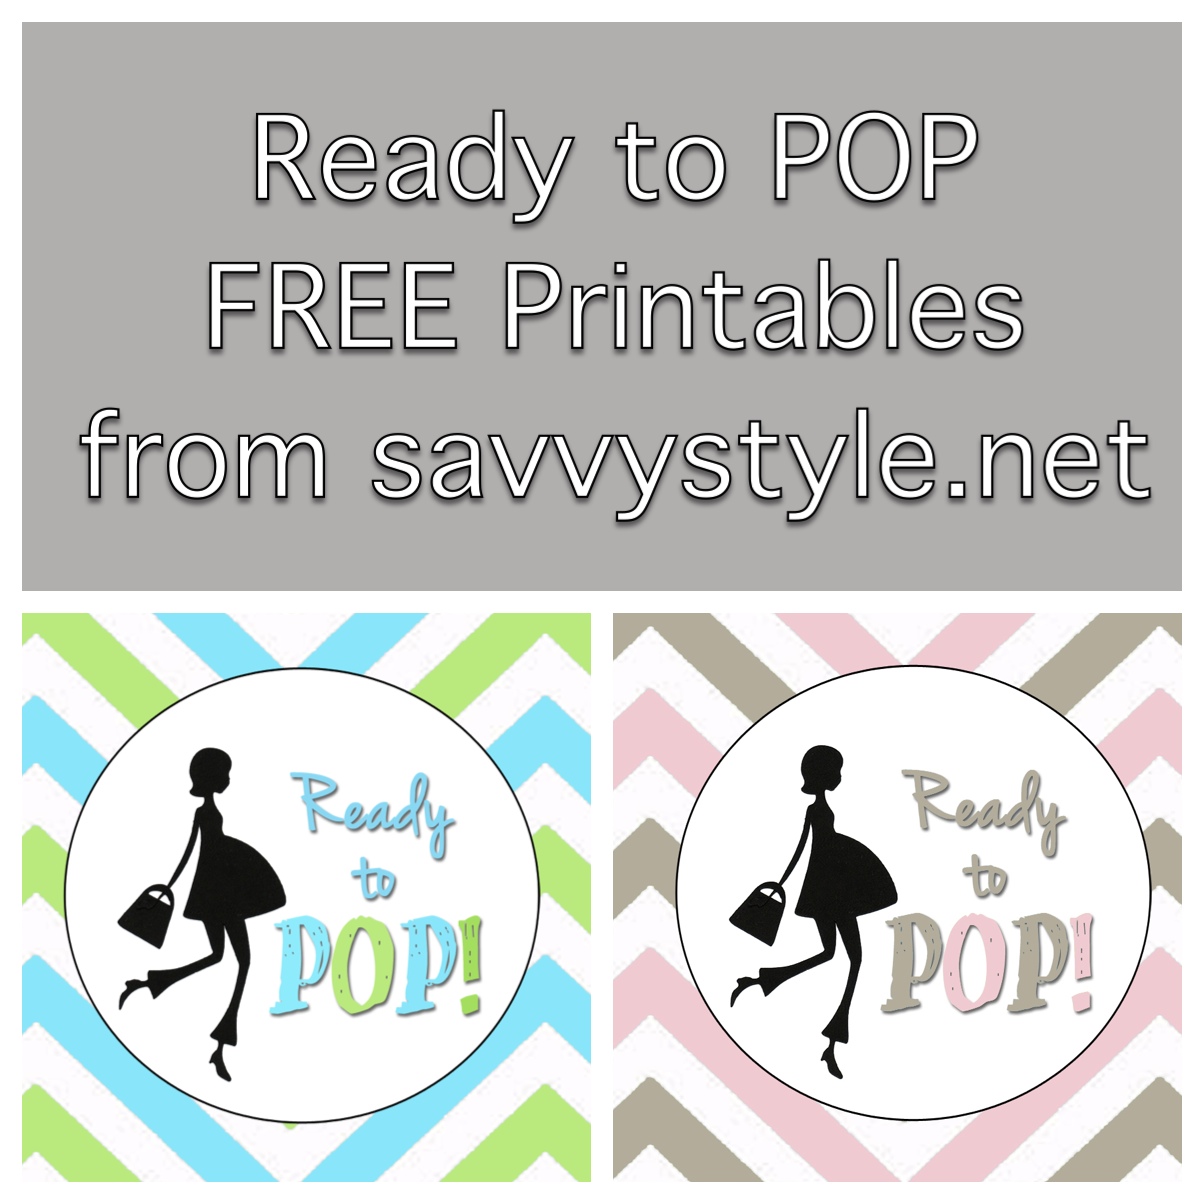 Ready To Pop Tags Printable Baby Girl Shower Tags Ready to Pop Labels Personalized Printable Going to Pop Printable Baby Shower Tags